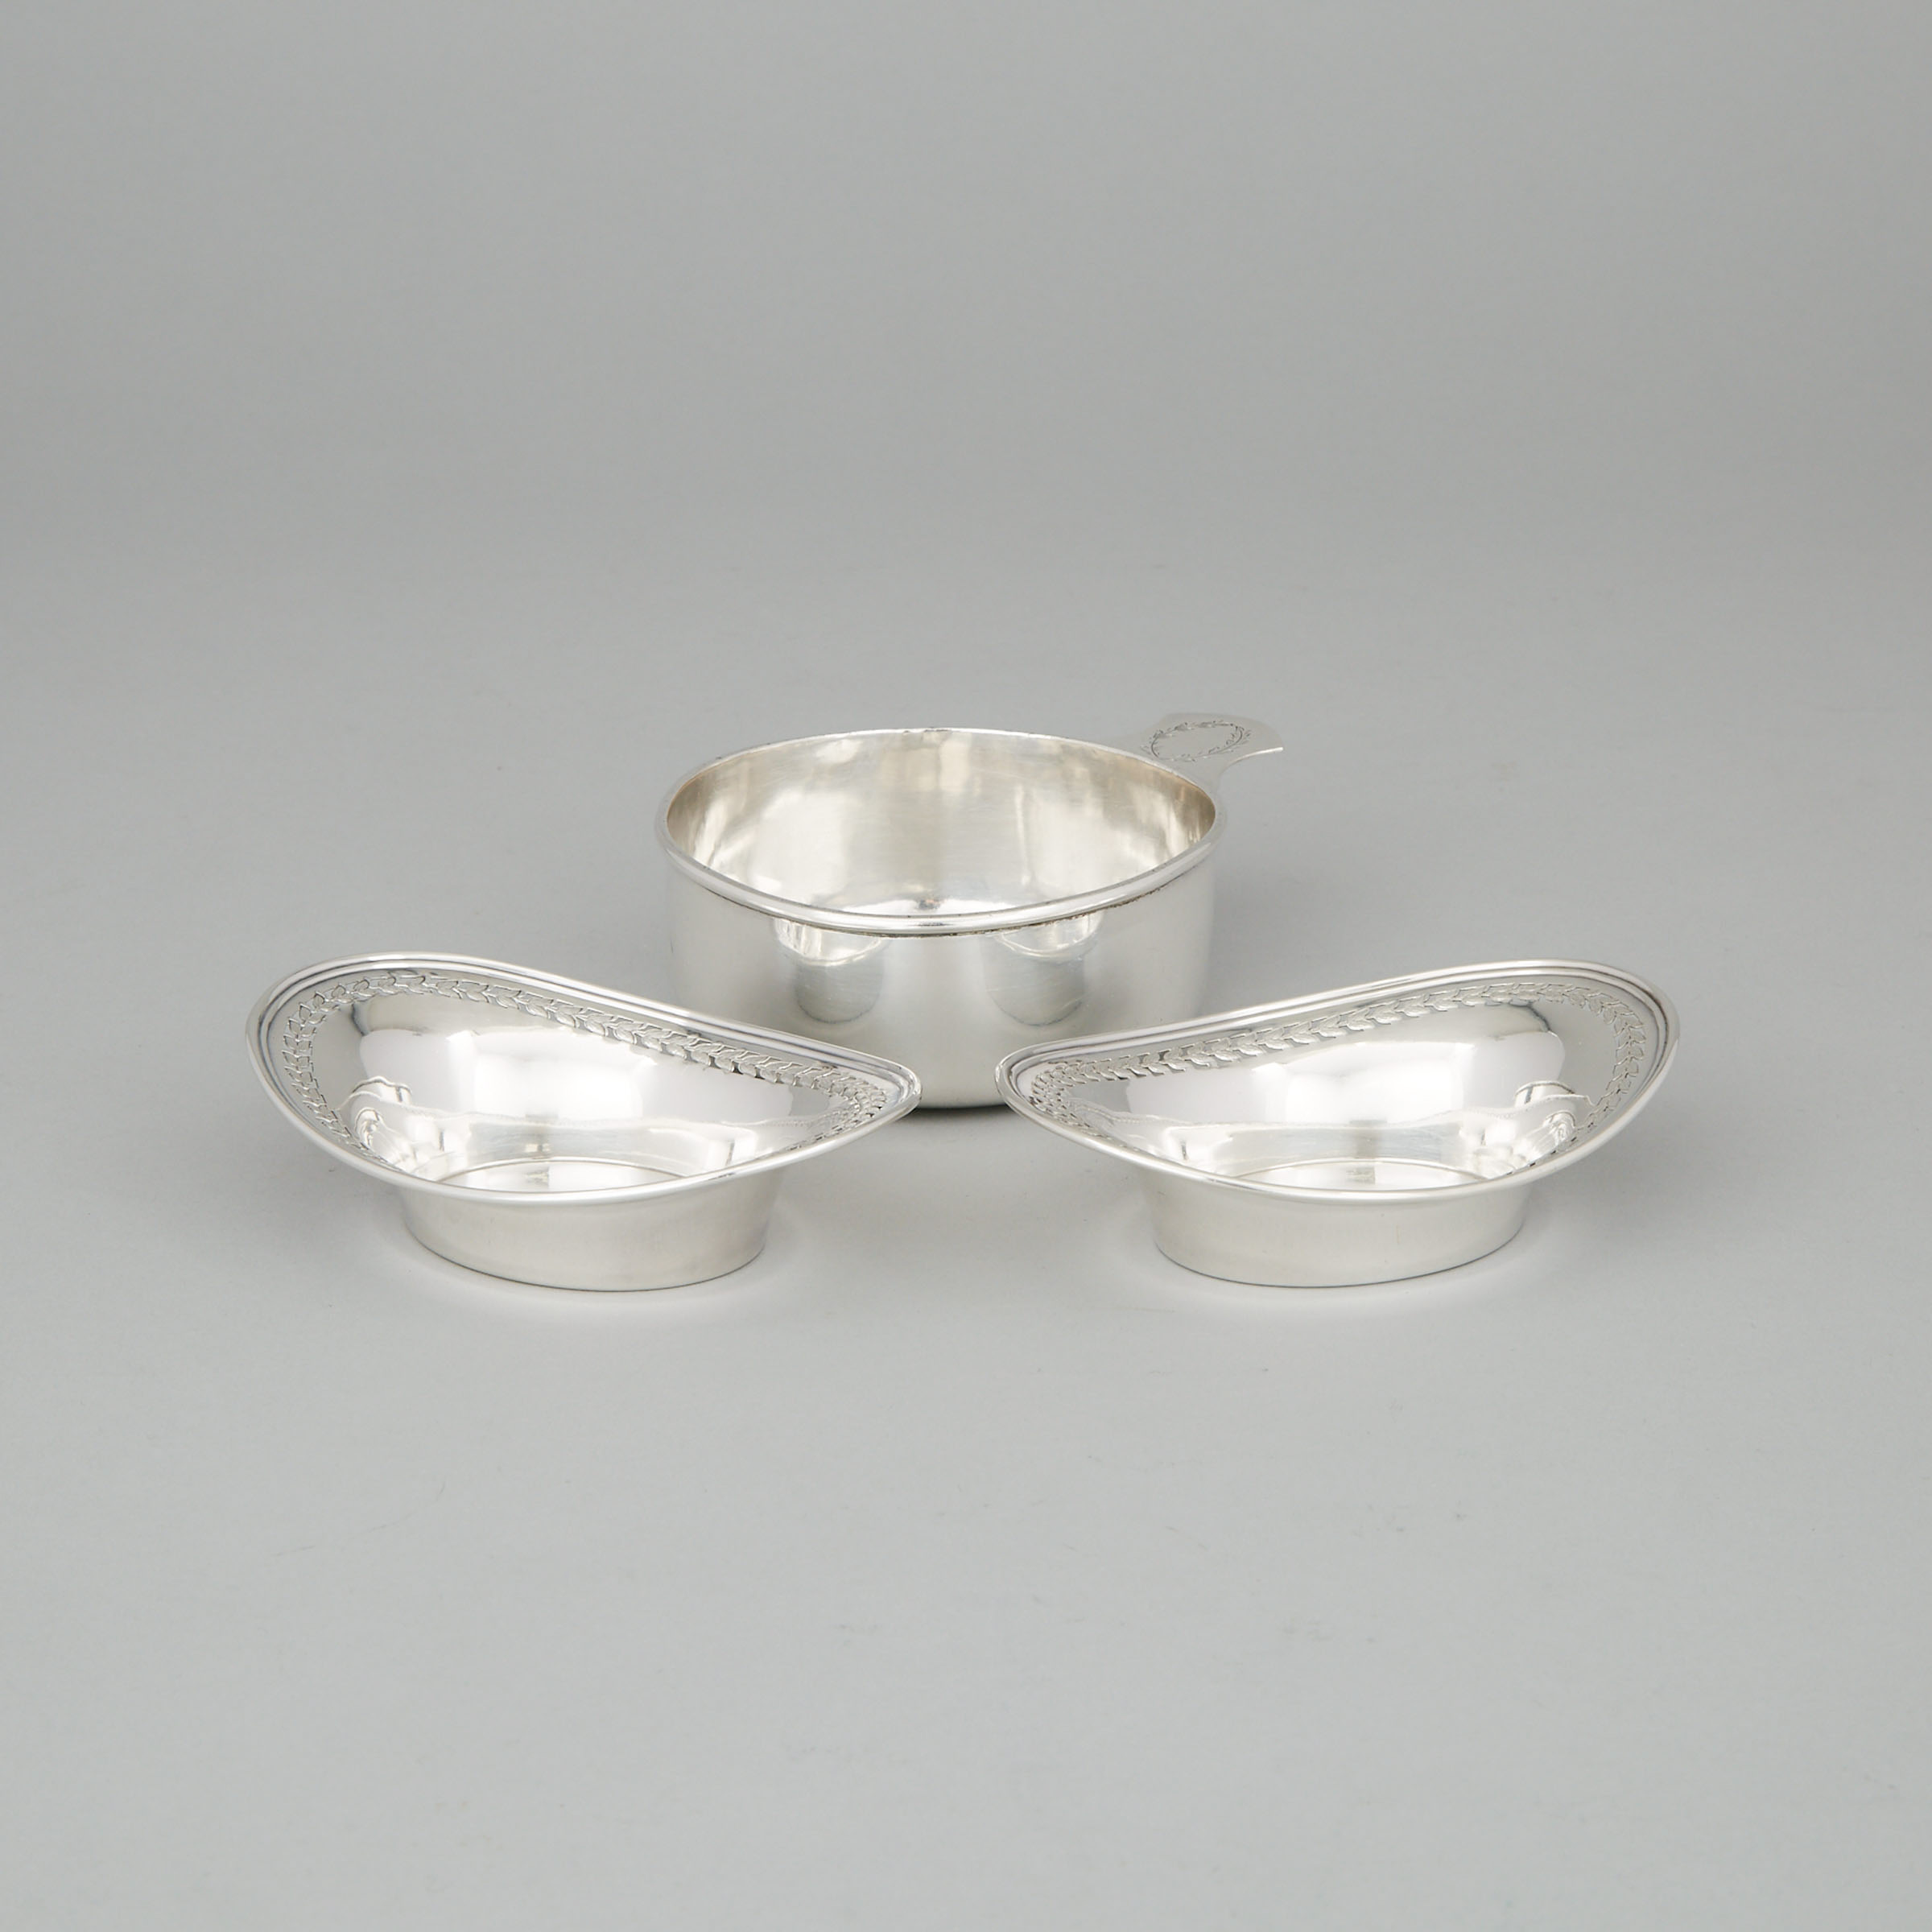 Canadian Silver Porringer and Pair of Pierced Oval Almond Dishes, Henry Birks & Sons, Montreal, Que., c.1904-24